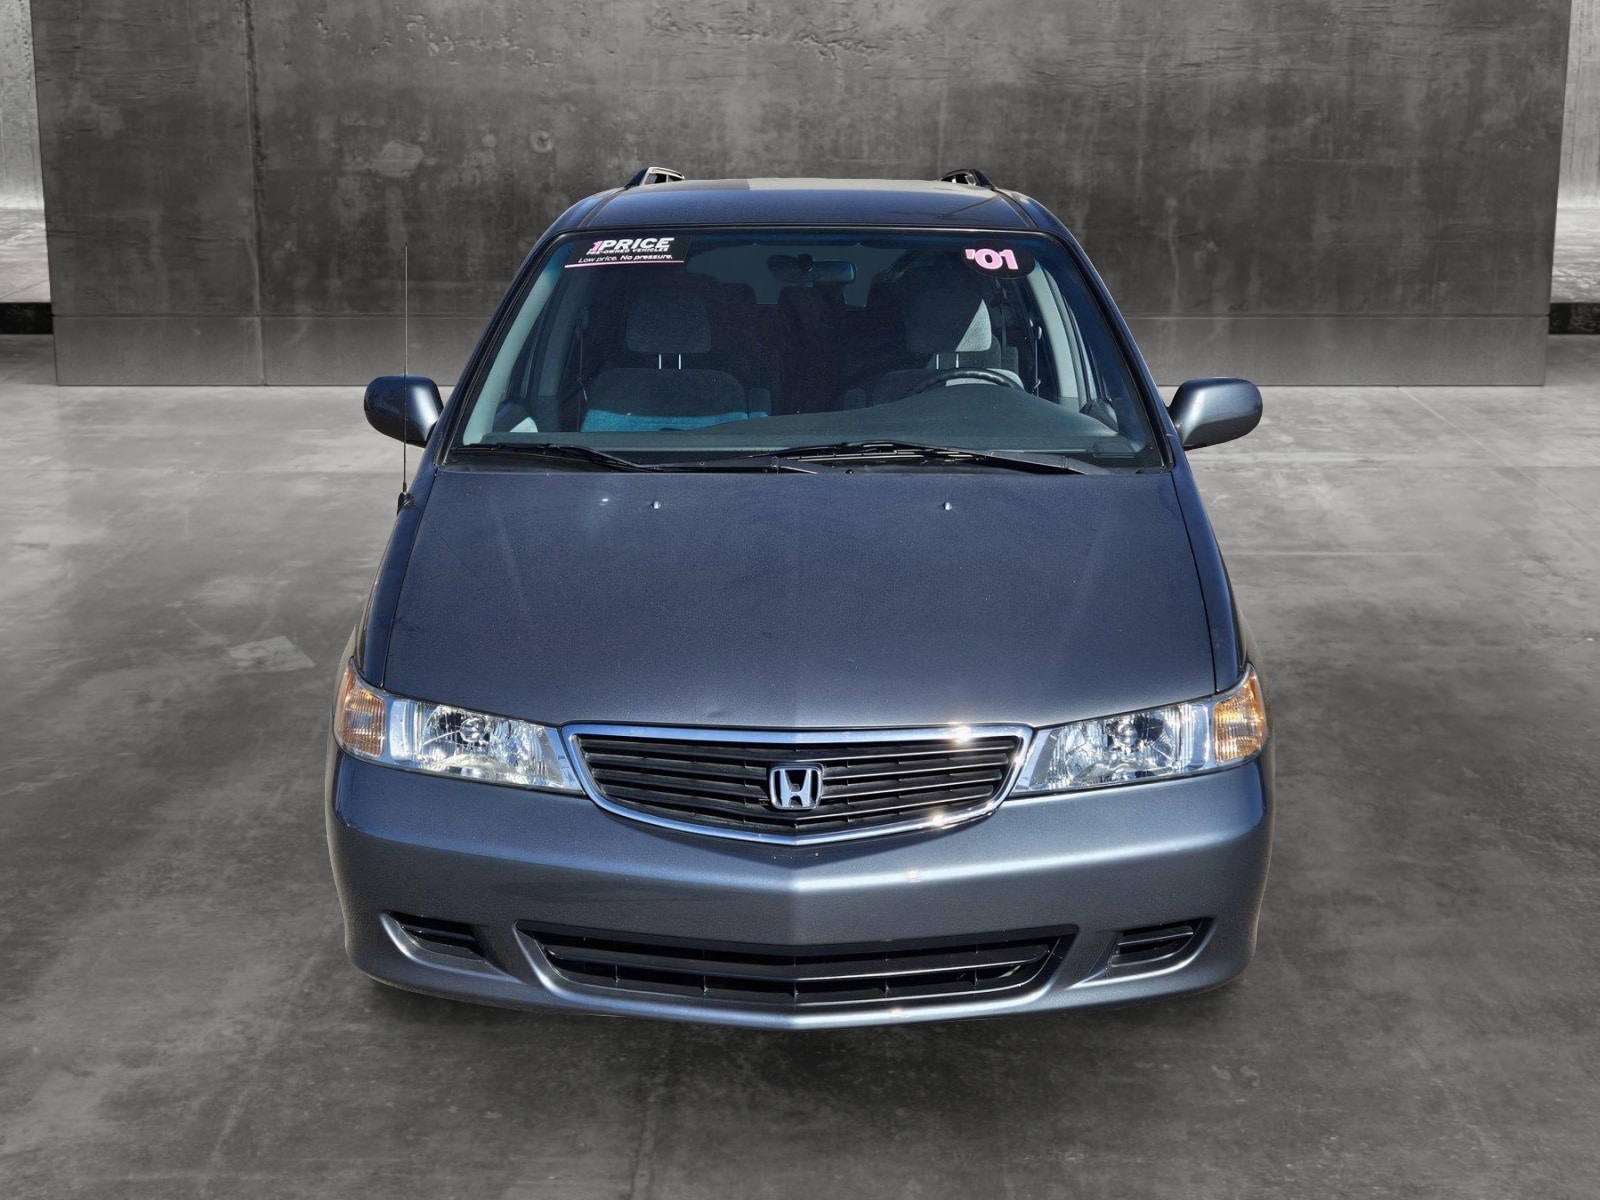 Used 2001 Honda Odyssey EX with VIN 2HKRL18691H606267 for sale in Tucson, AZ